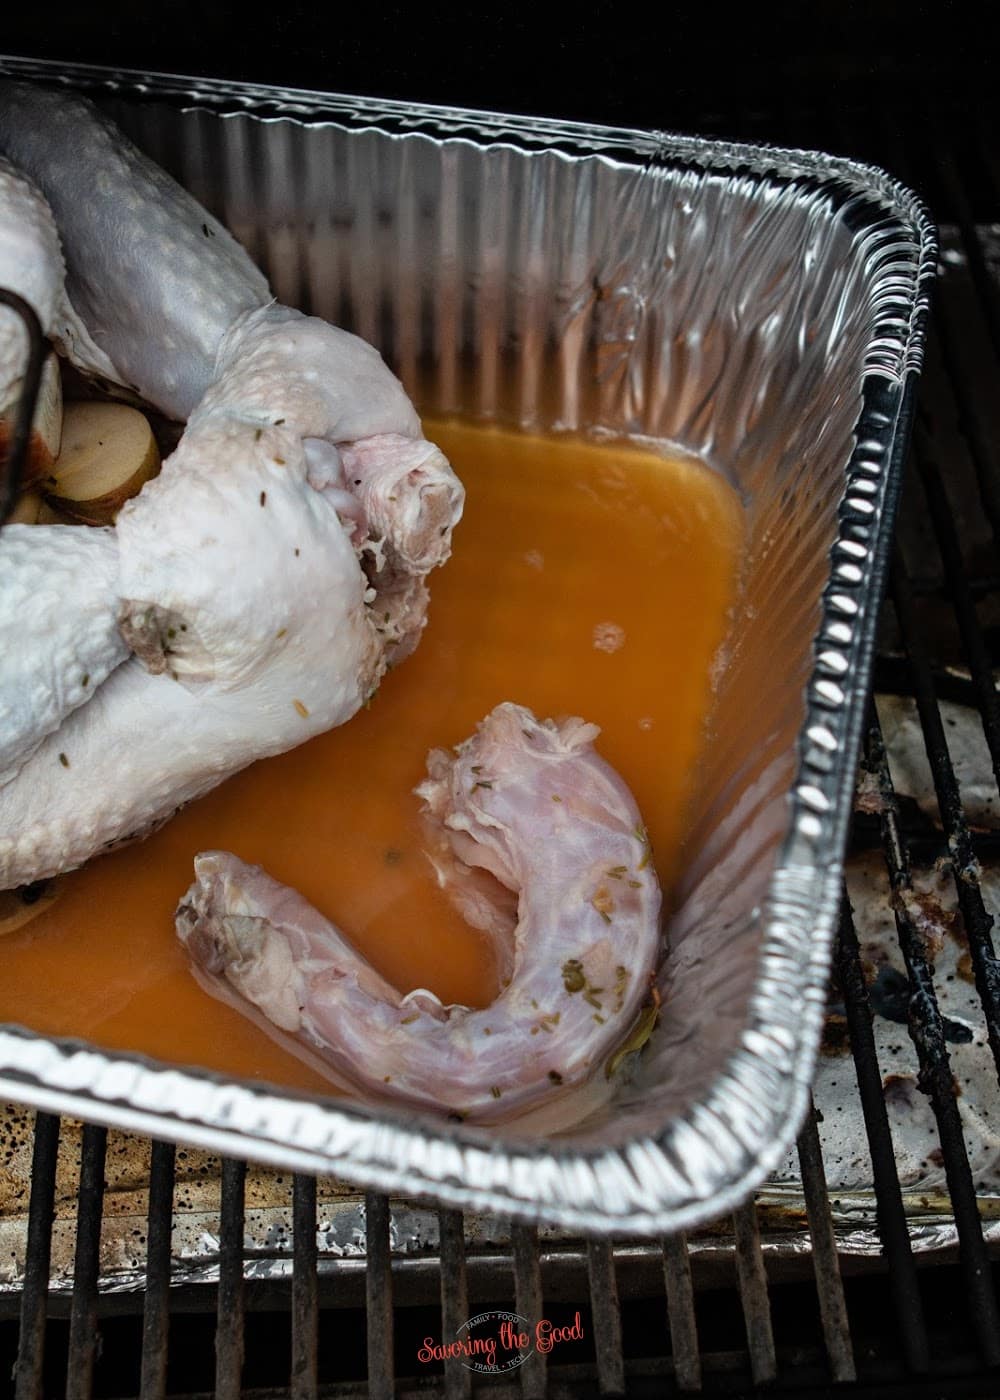 A turkey neck in a pan on the grill for a Whole smoked turkey